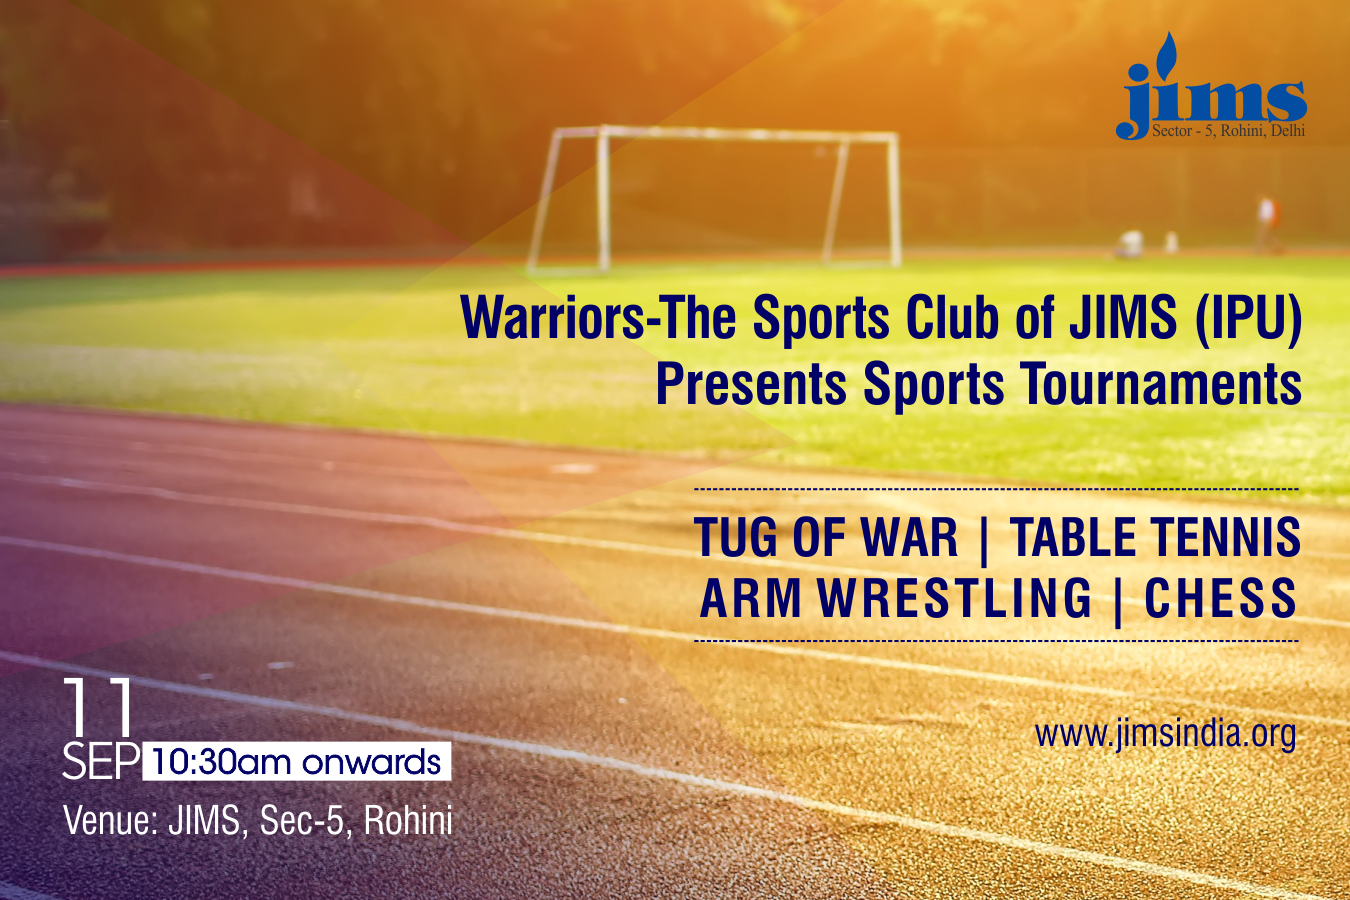 JIMS, Rohini sports club Warriors is organizing sports tournament on September 11, 2019 from 10:30 am onwards